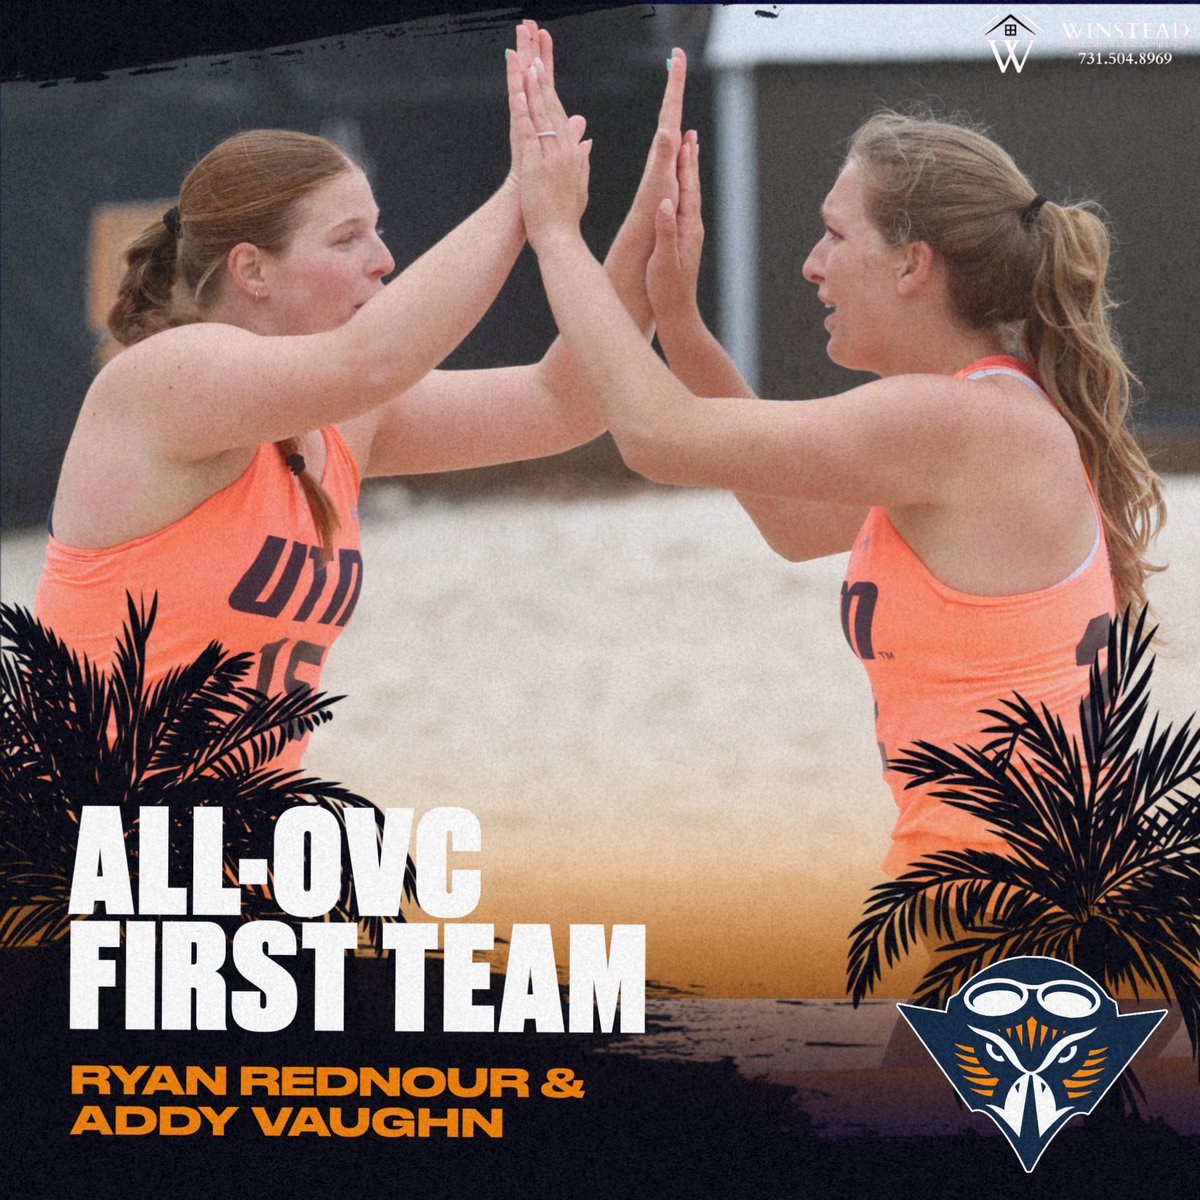 Congratulations to UT Martin's No. 3 pair of Ryan Rednour and Addy Vaughn, who were voted to the All-Ohio Valley Conference first team tonight!

🏐 14-15 overall record
🏐 9-1 OVC record

#MartinMade | #OVCit